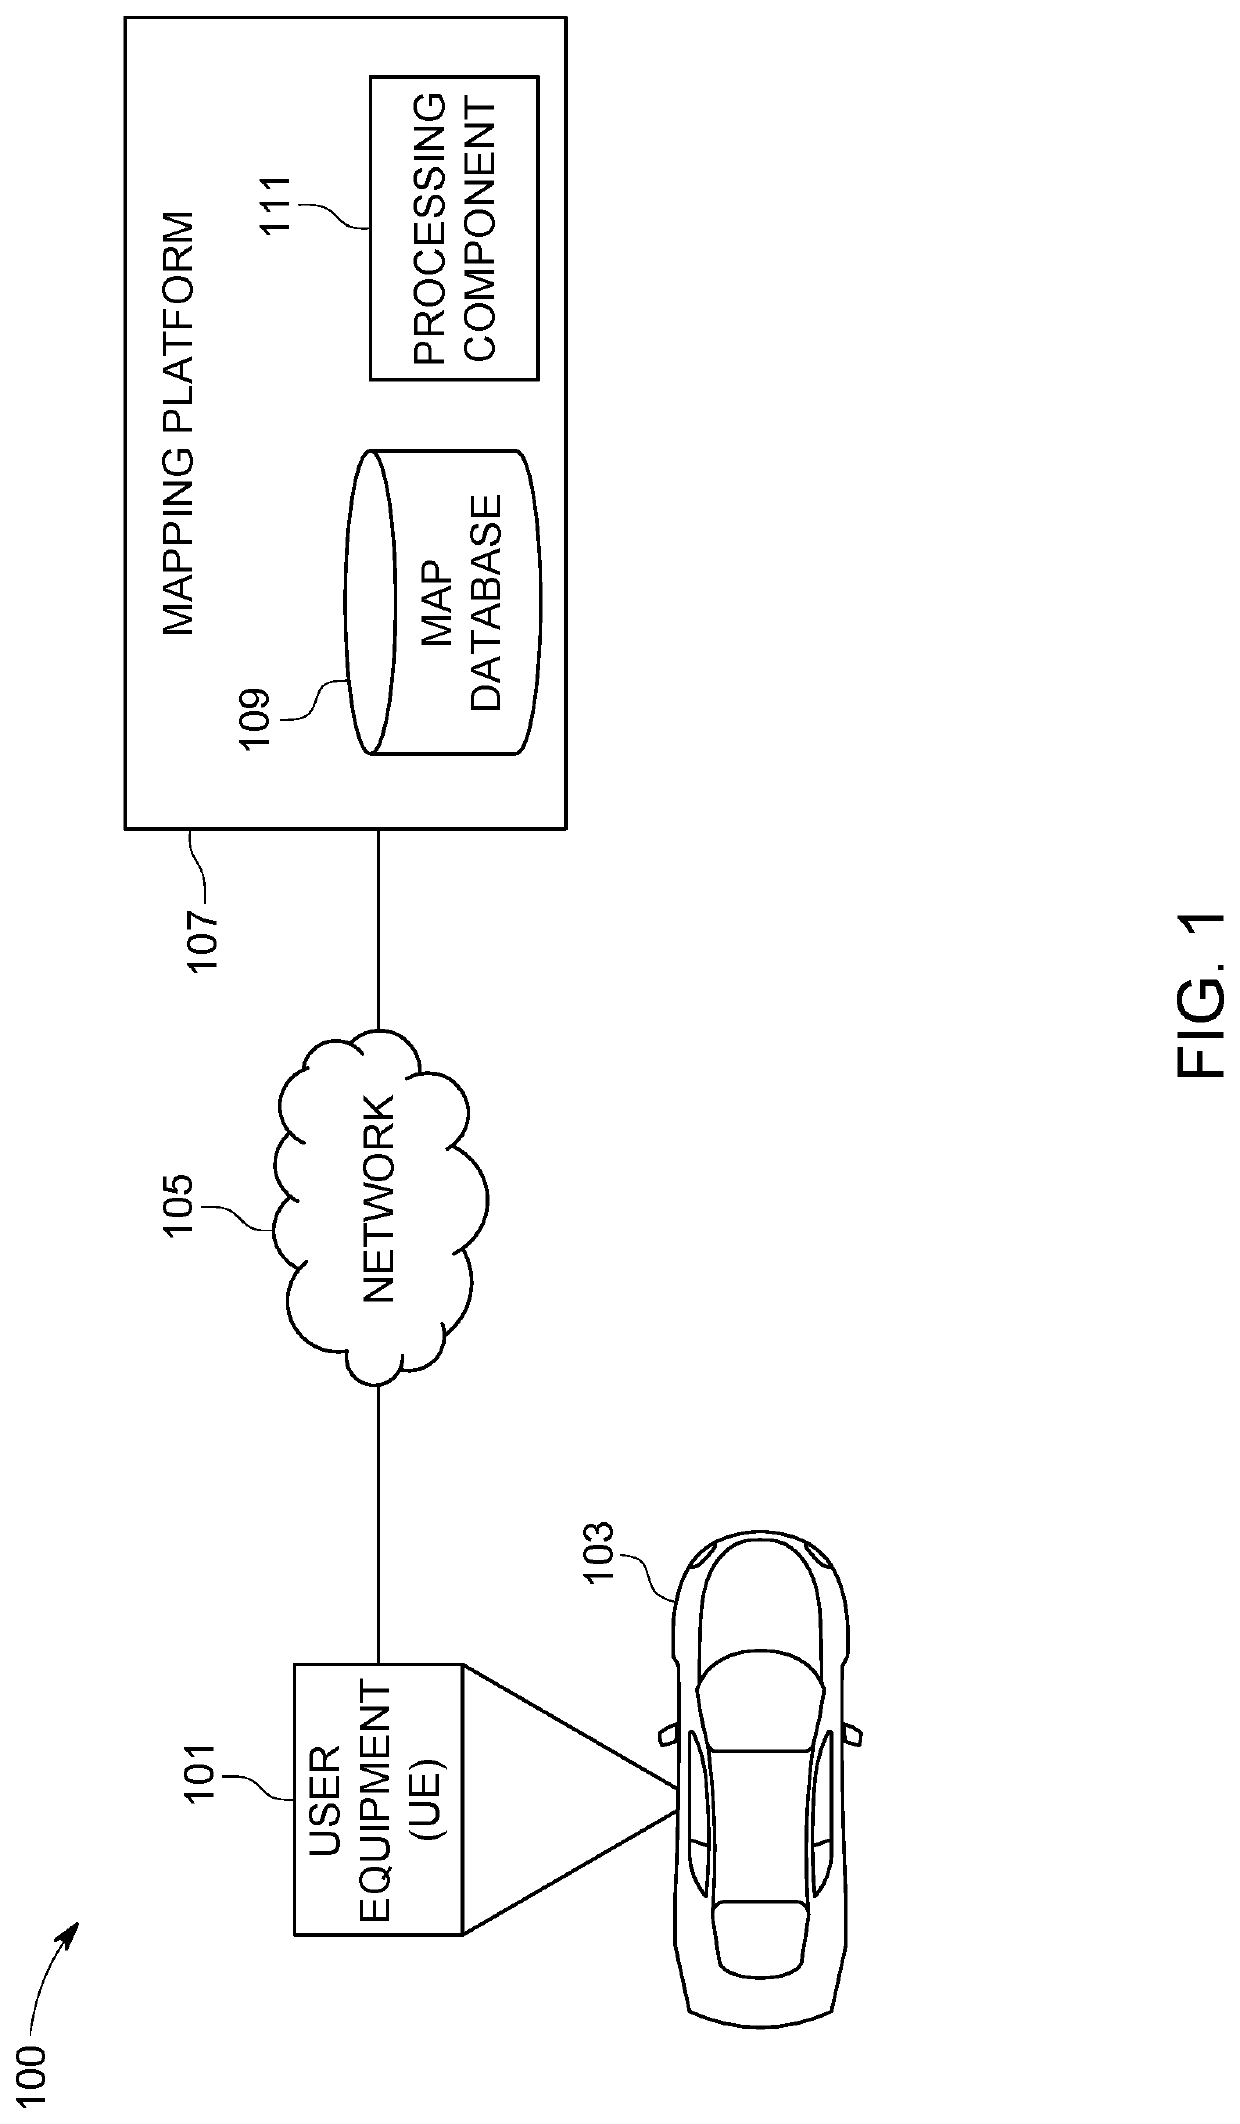 Method and system for classifying vehicle based road sign observations